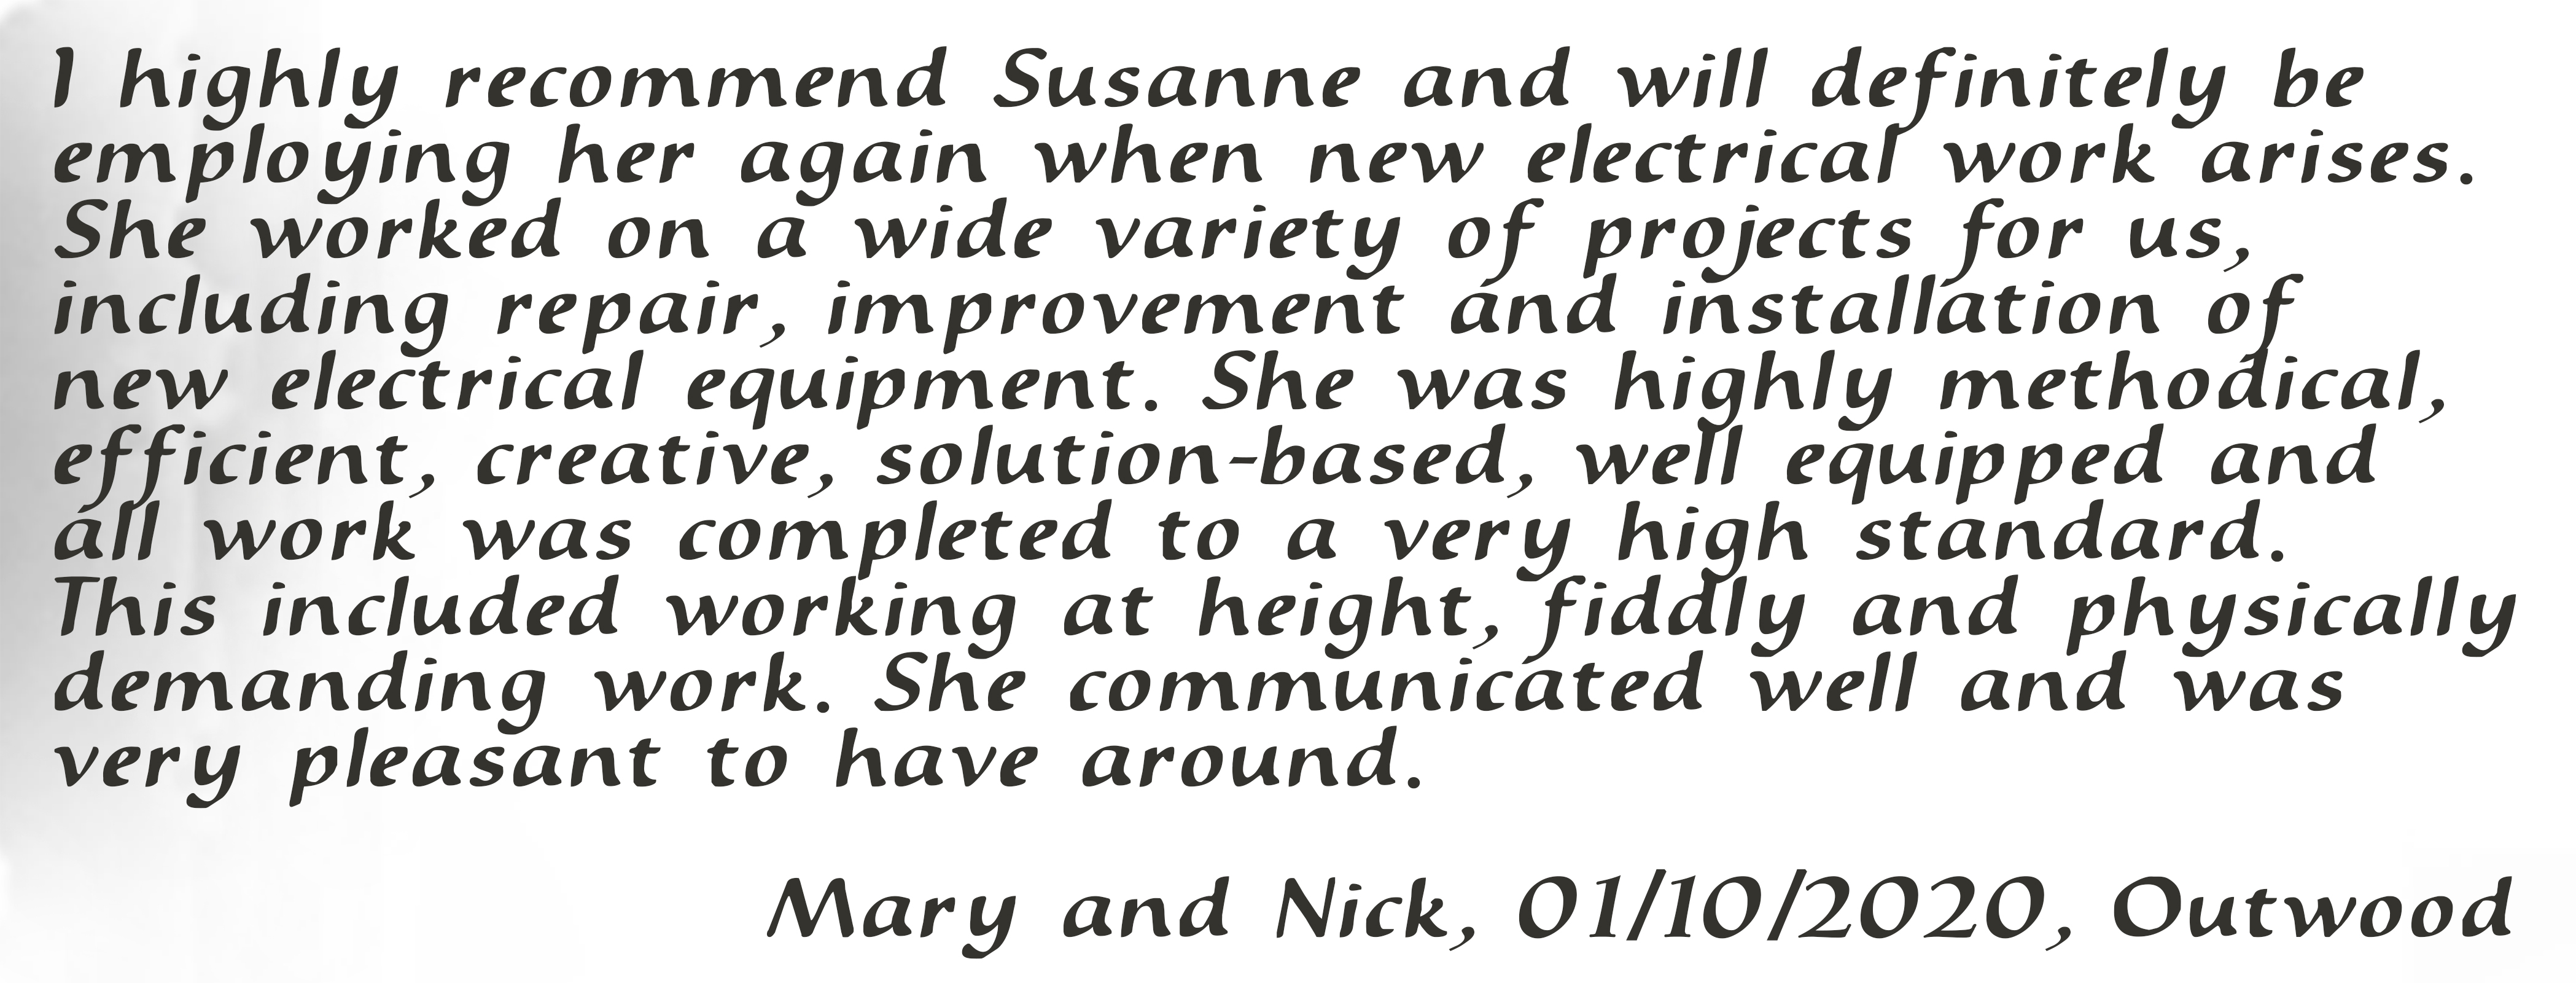 I highly recommend Susanne and will definitely be employing her again when new electrical work arises. She worked on a wide variety of projects for us including repair, improvement and installation of new electrical equipment. She was highly methodical, efficient, creative, solution-based, well equipped and all work was completed to a very high standard. This included working at height, fiddly and physically demanding work. She communicated well and was very pleasant to have around. Mary and Nick, 01/10/2020